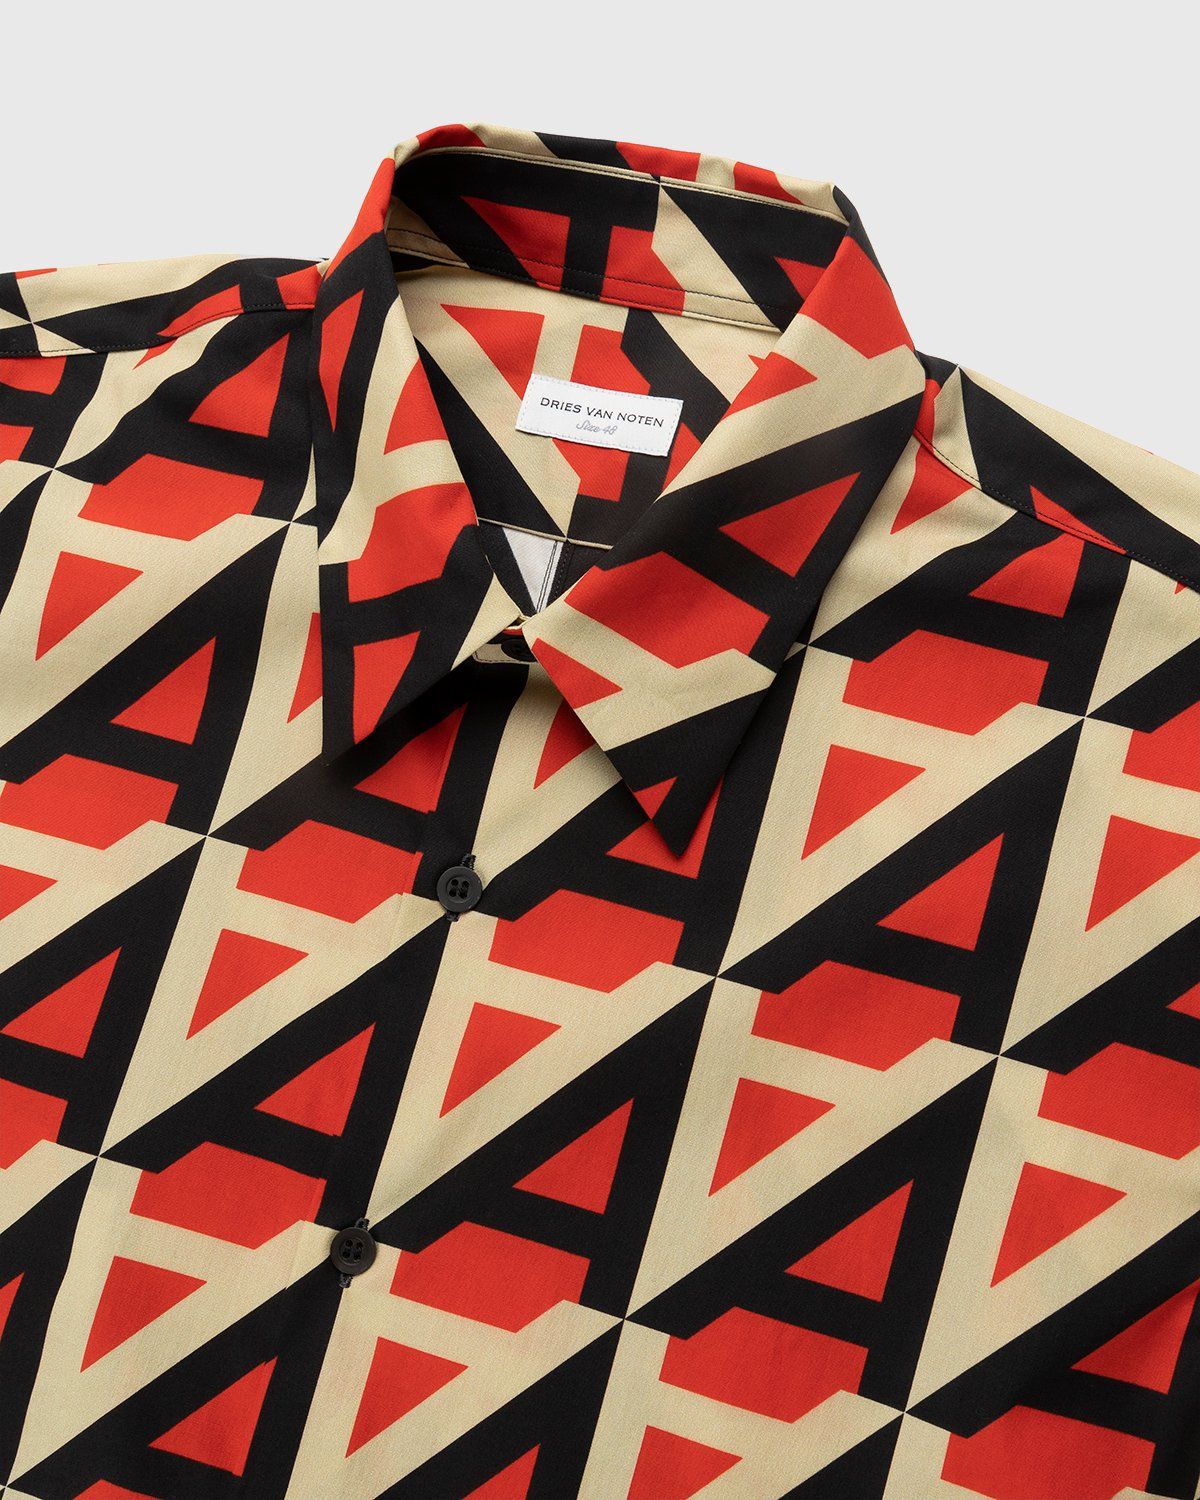 Dries van Noten – Curle "A" Shirt Red - Shirts - Red - Image 4